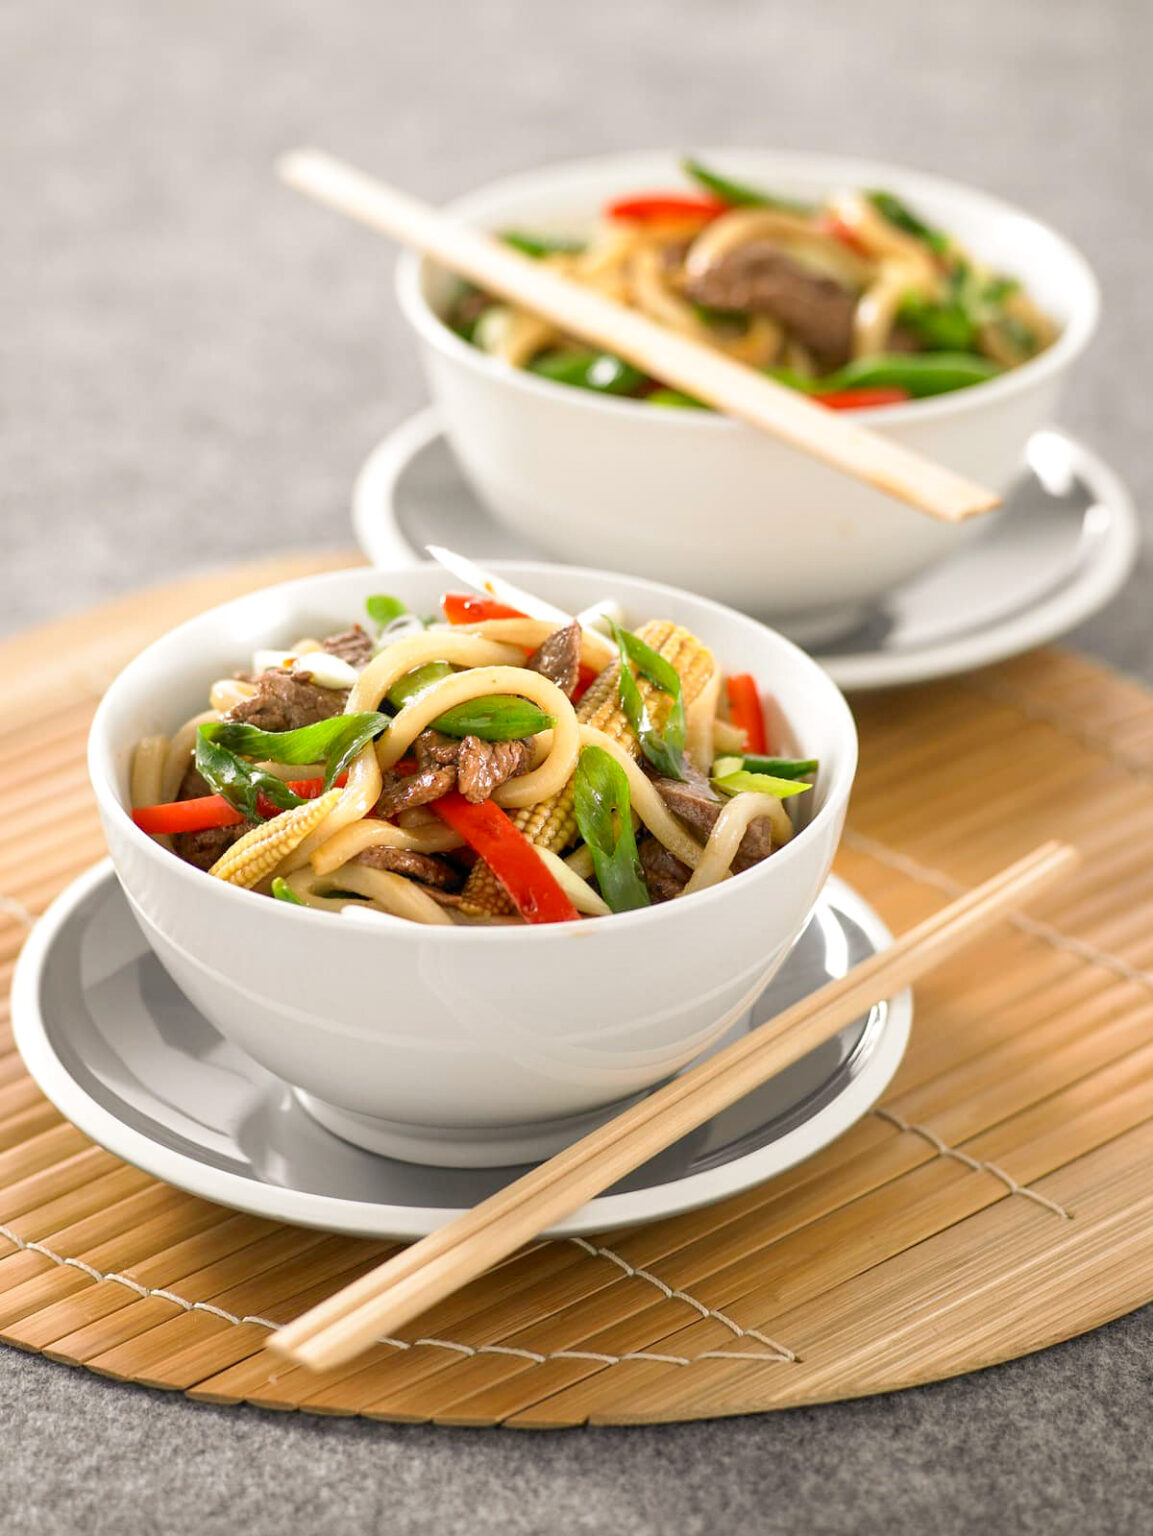 Lamb and vegetable noodle stir-fry